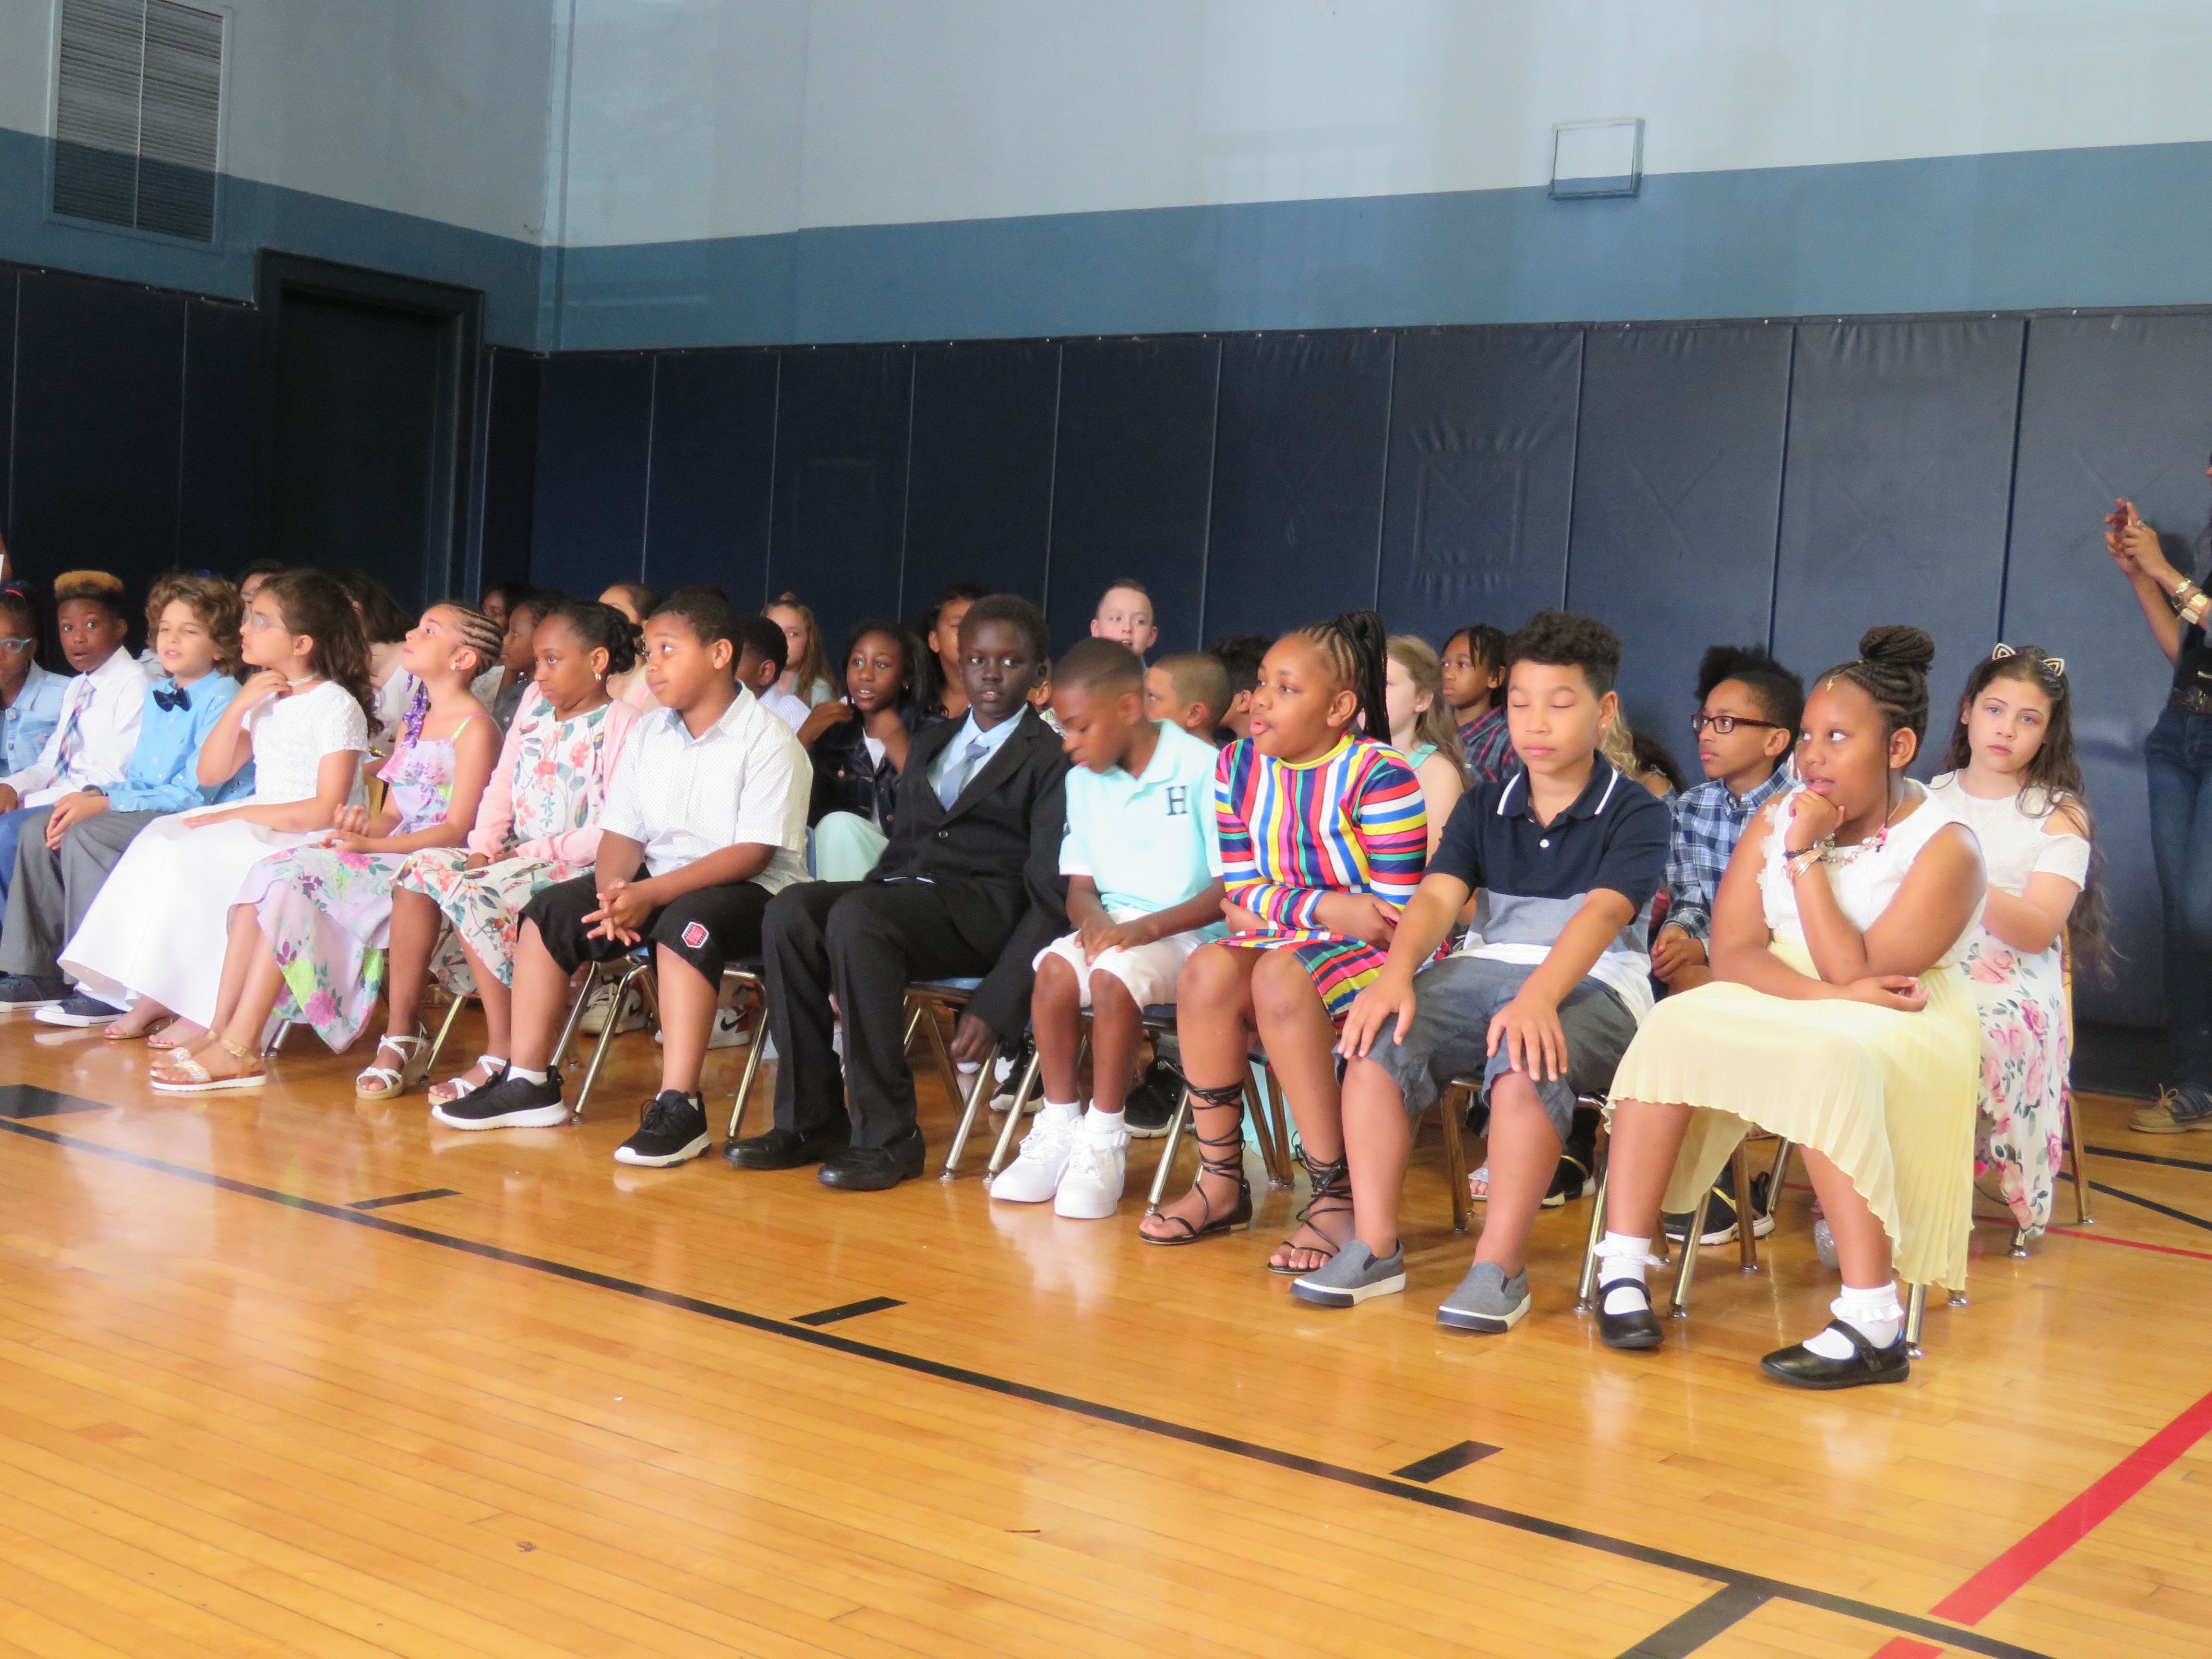 SASCS elementary celebrated the fourth grade Atoms accomplishments at their Moving Up ceremony